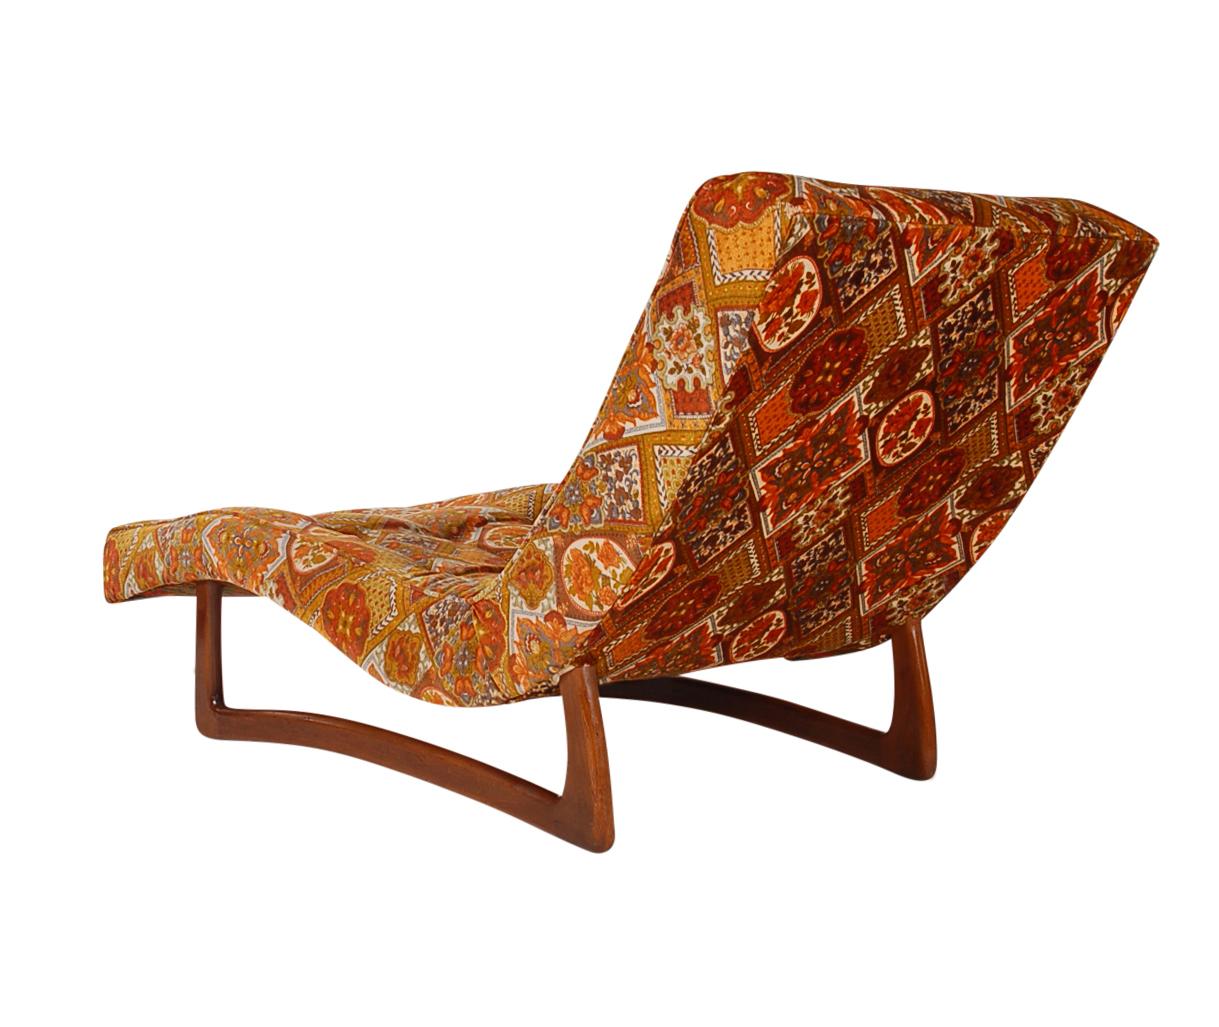 American Mid-Century Modern Chaise Lounge Chair in Walnut by Adrian Pearsall